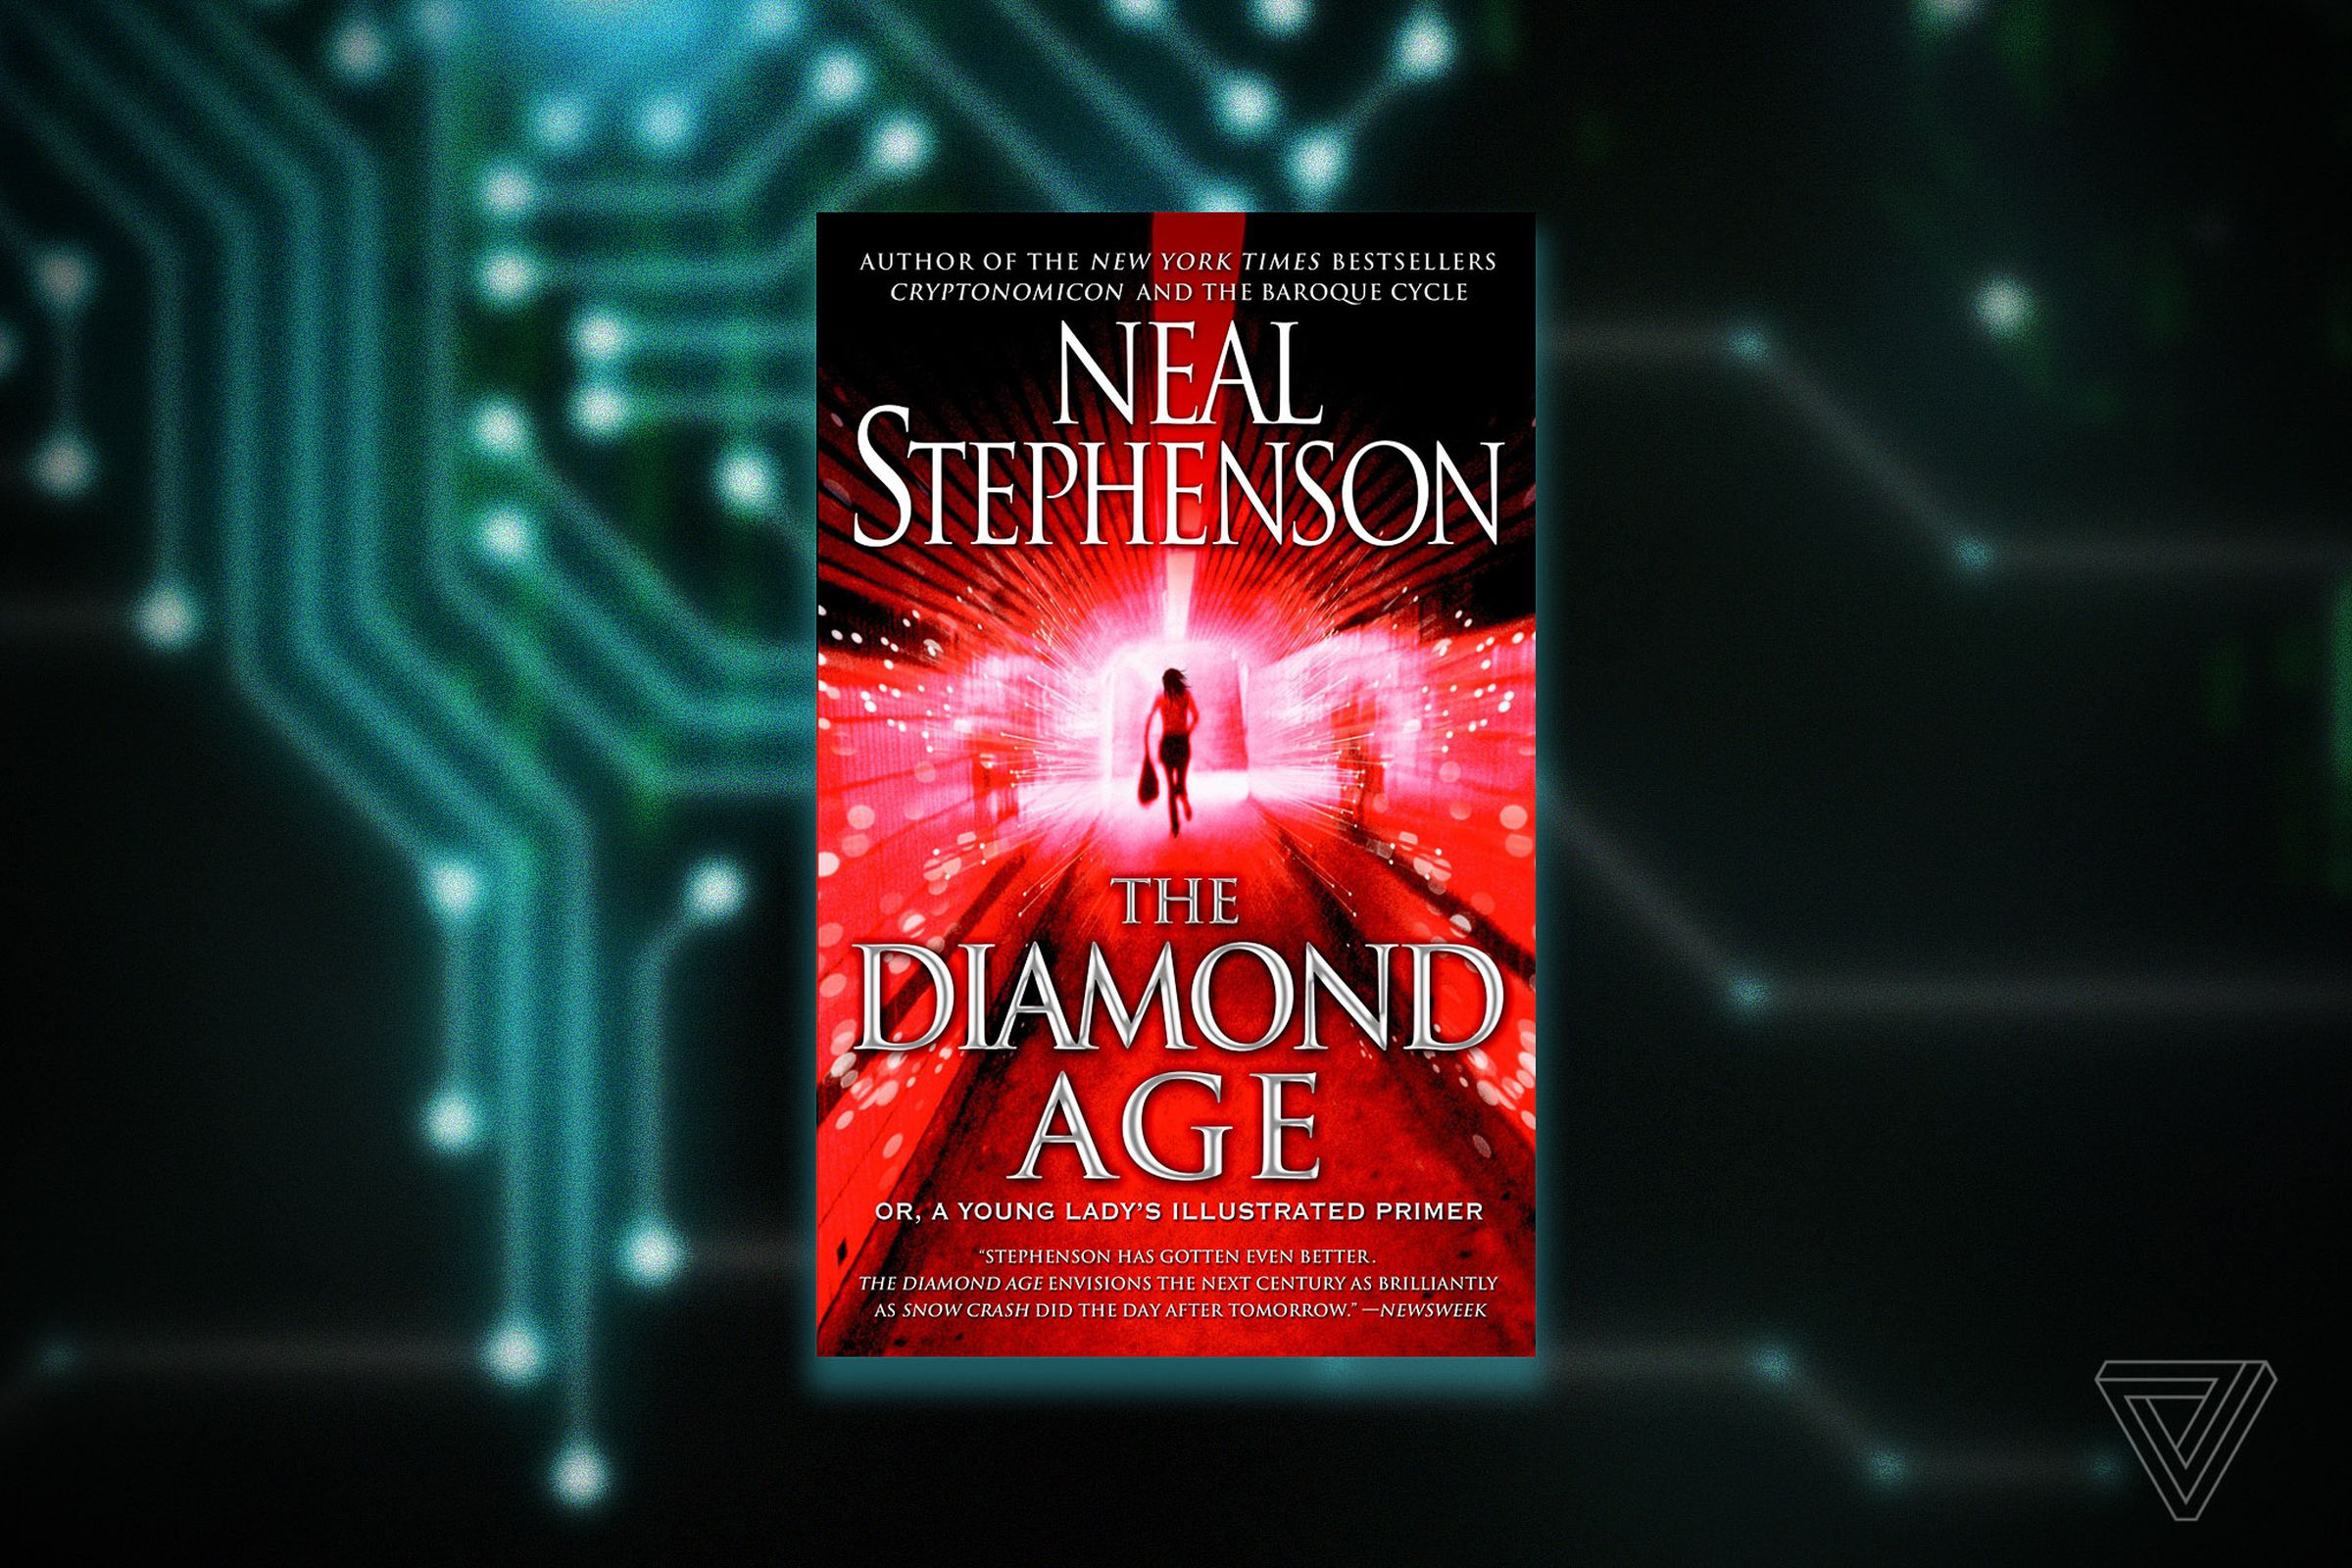 The Diamond Age: Or, A Young Lady’s Illustrated Primer, by Neal Stephenson 